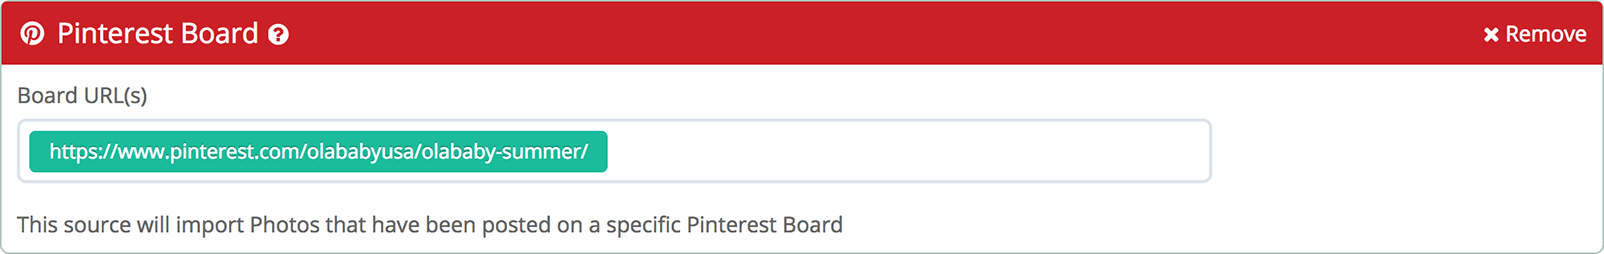 Gleam interface showing linked Pinterest account